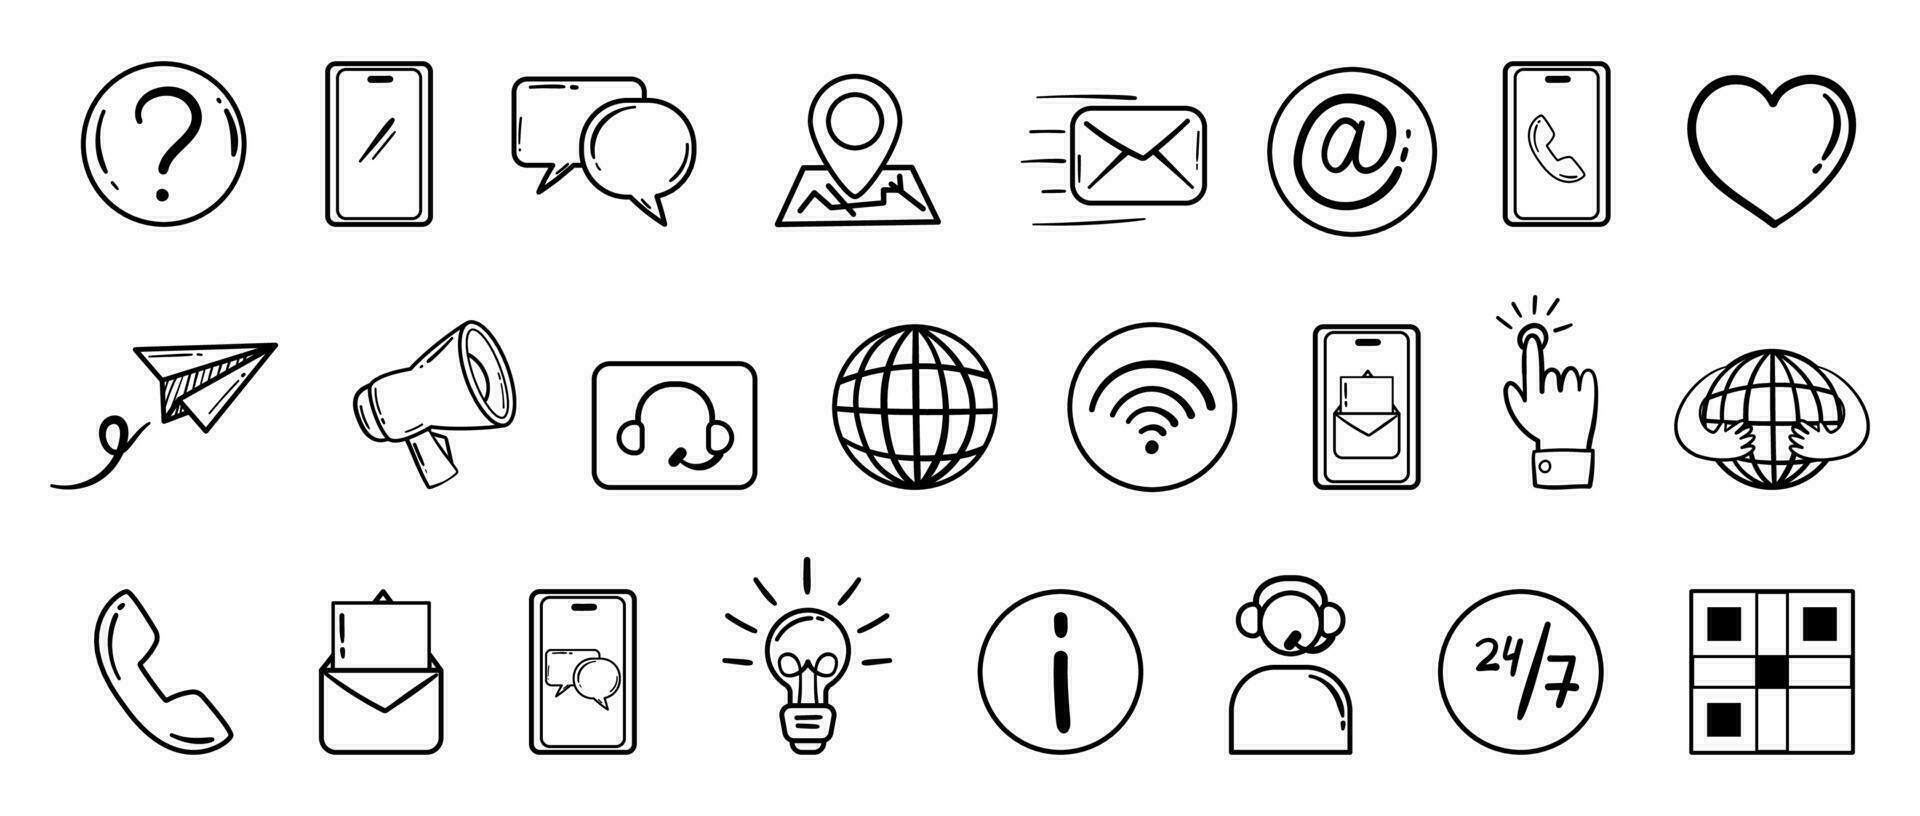 Contact us icon collection in hand drawn doodle outline style. Vector set with customer support black and white symbols - chat, email, phone and others.